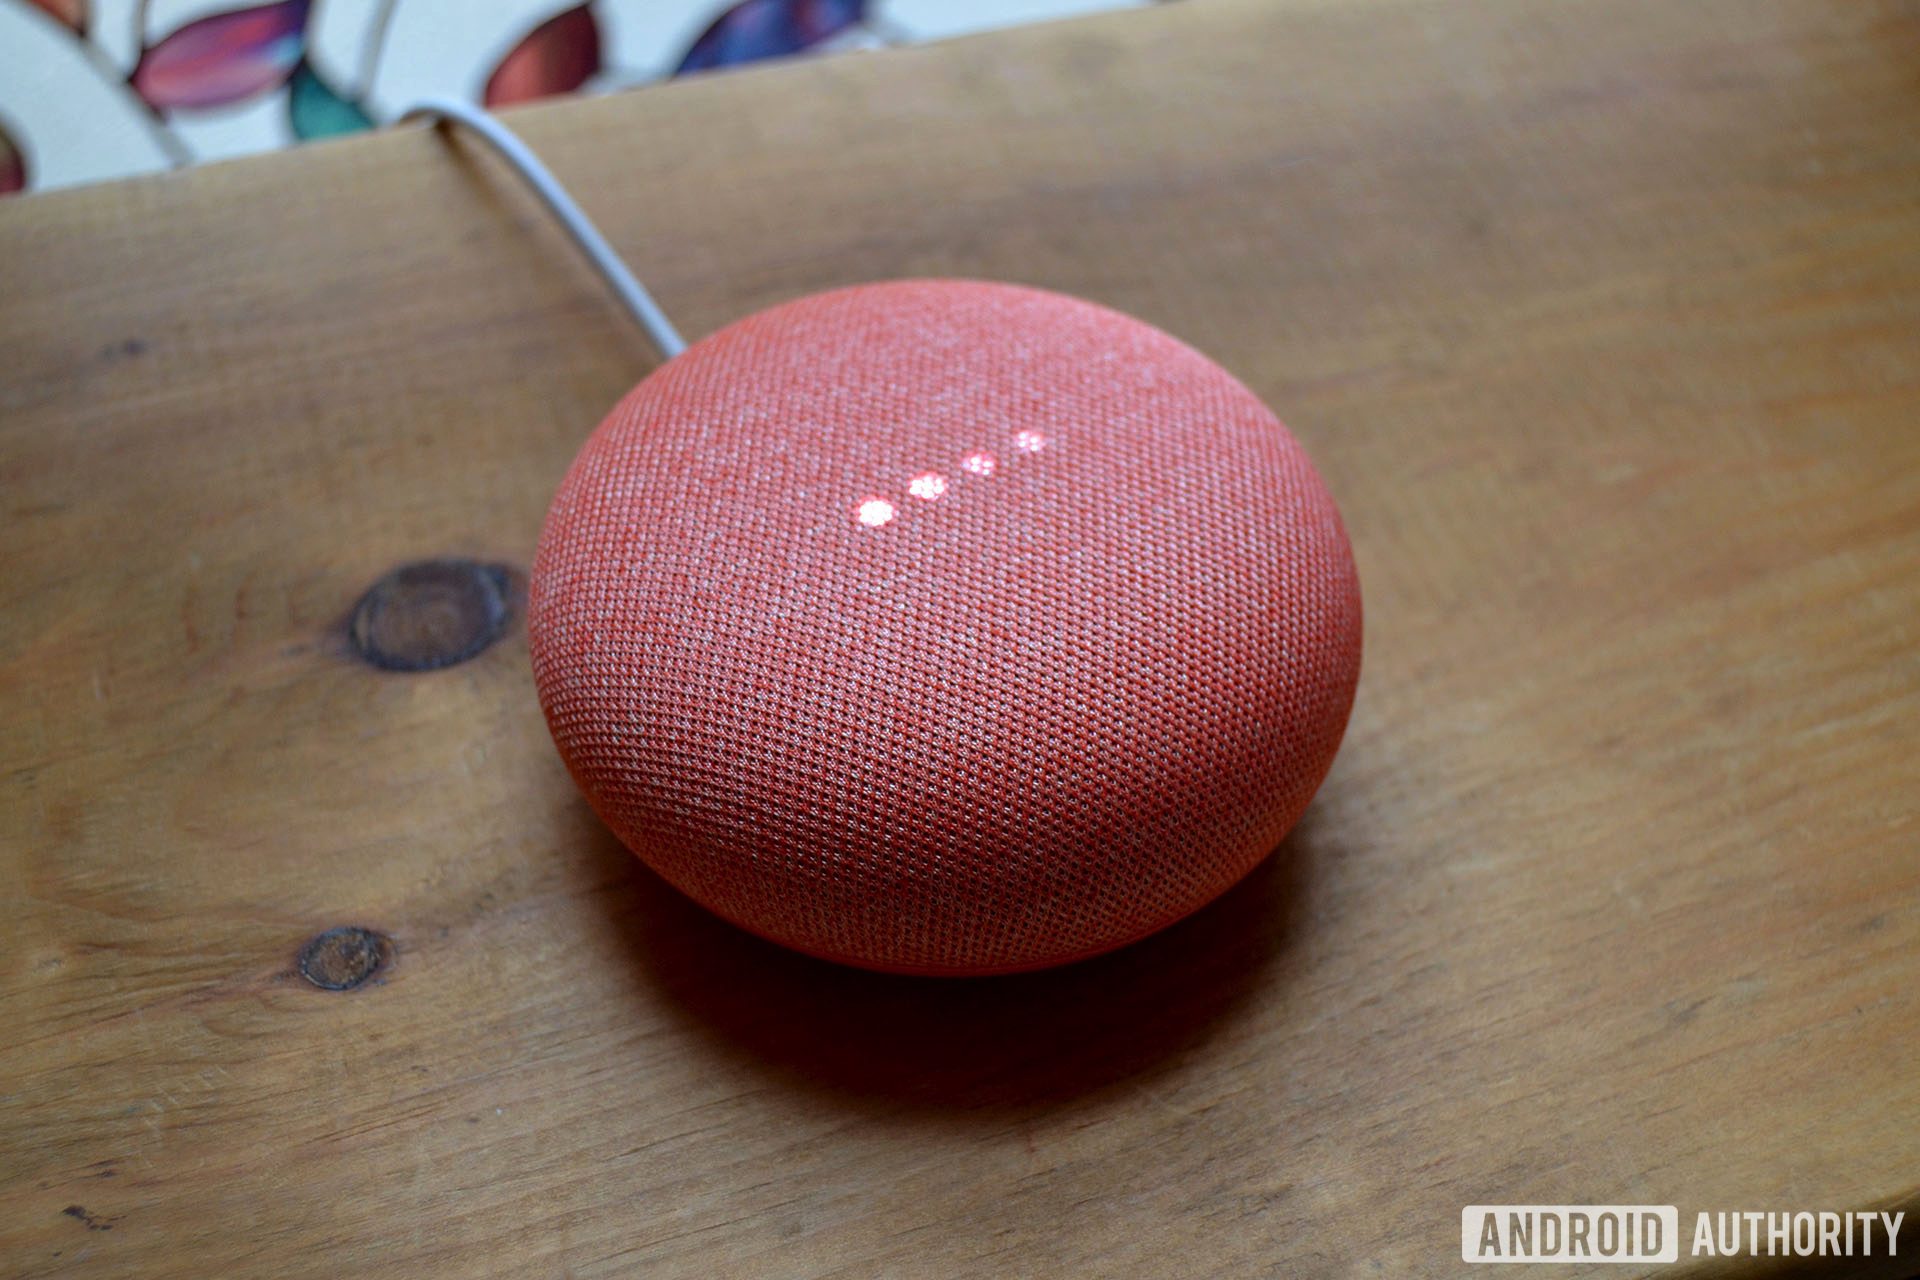 Pictured is the Google Home Mini in the coral color.